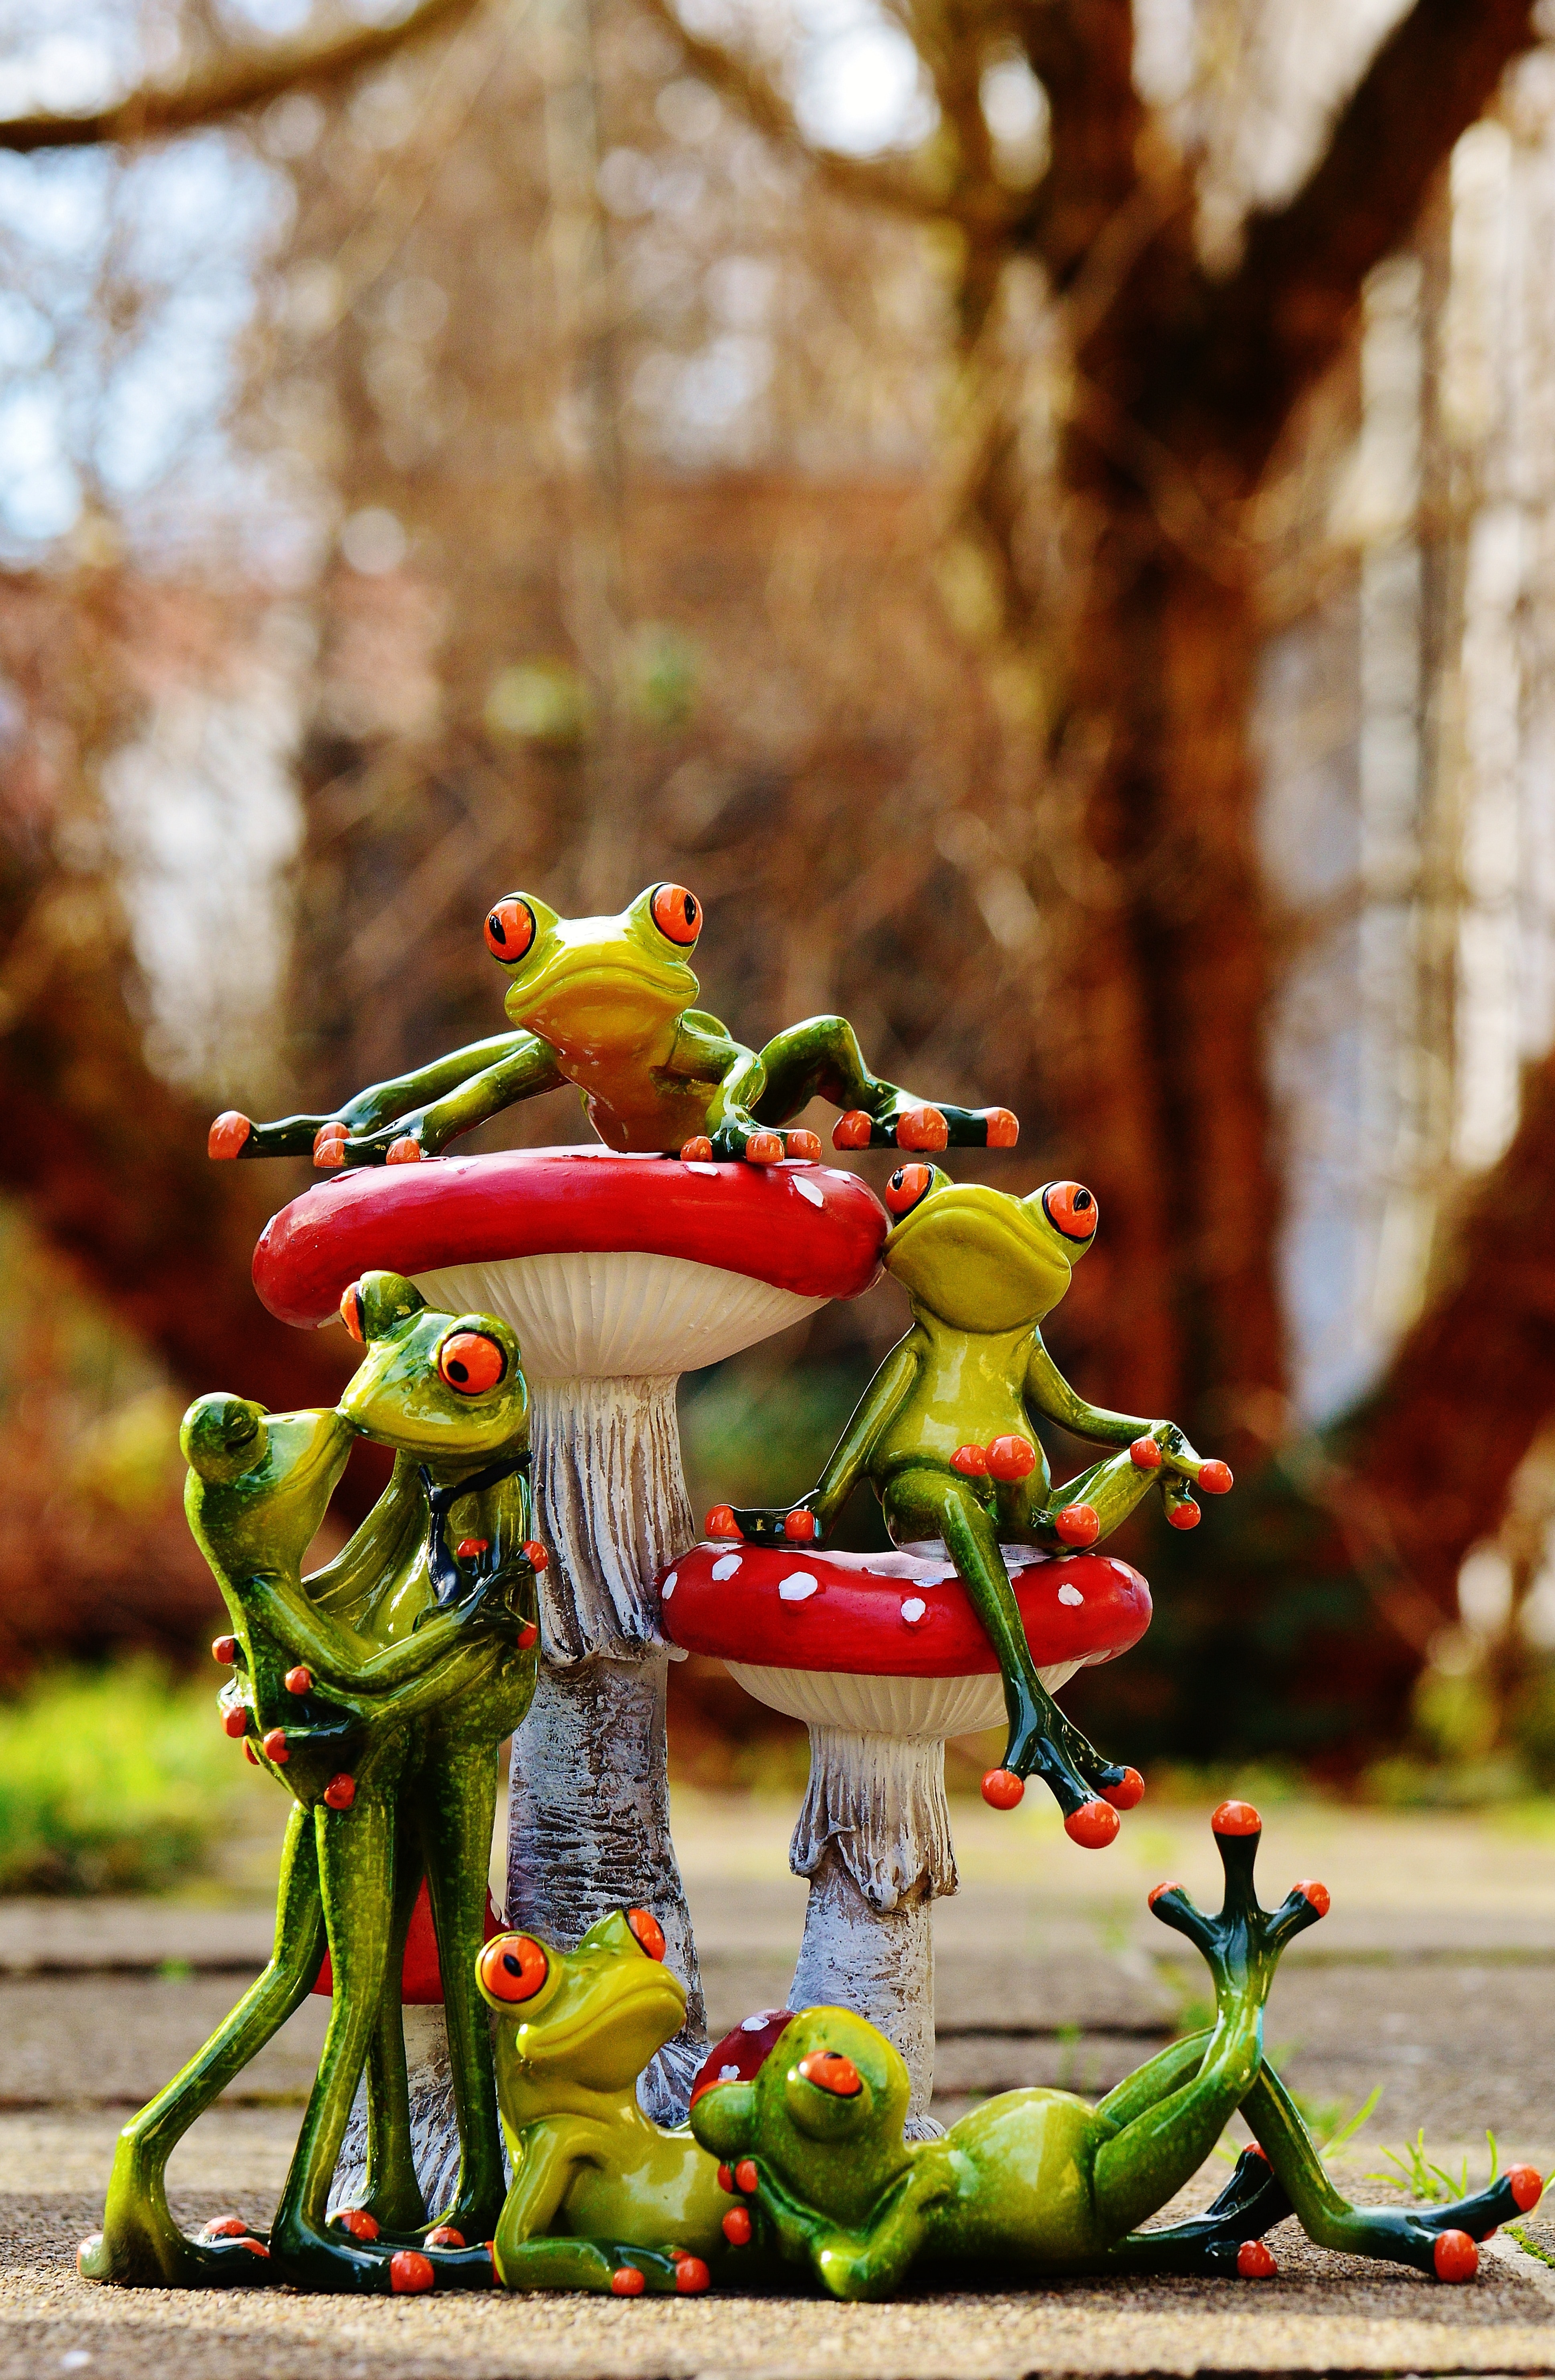 green frogs on red and white mushroom ceramic figurine